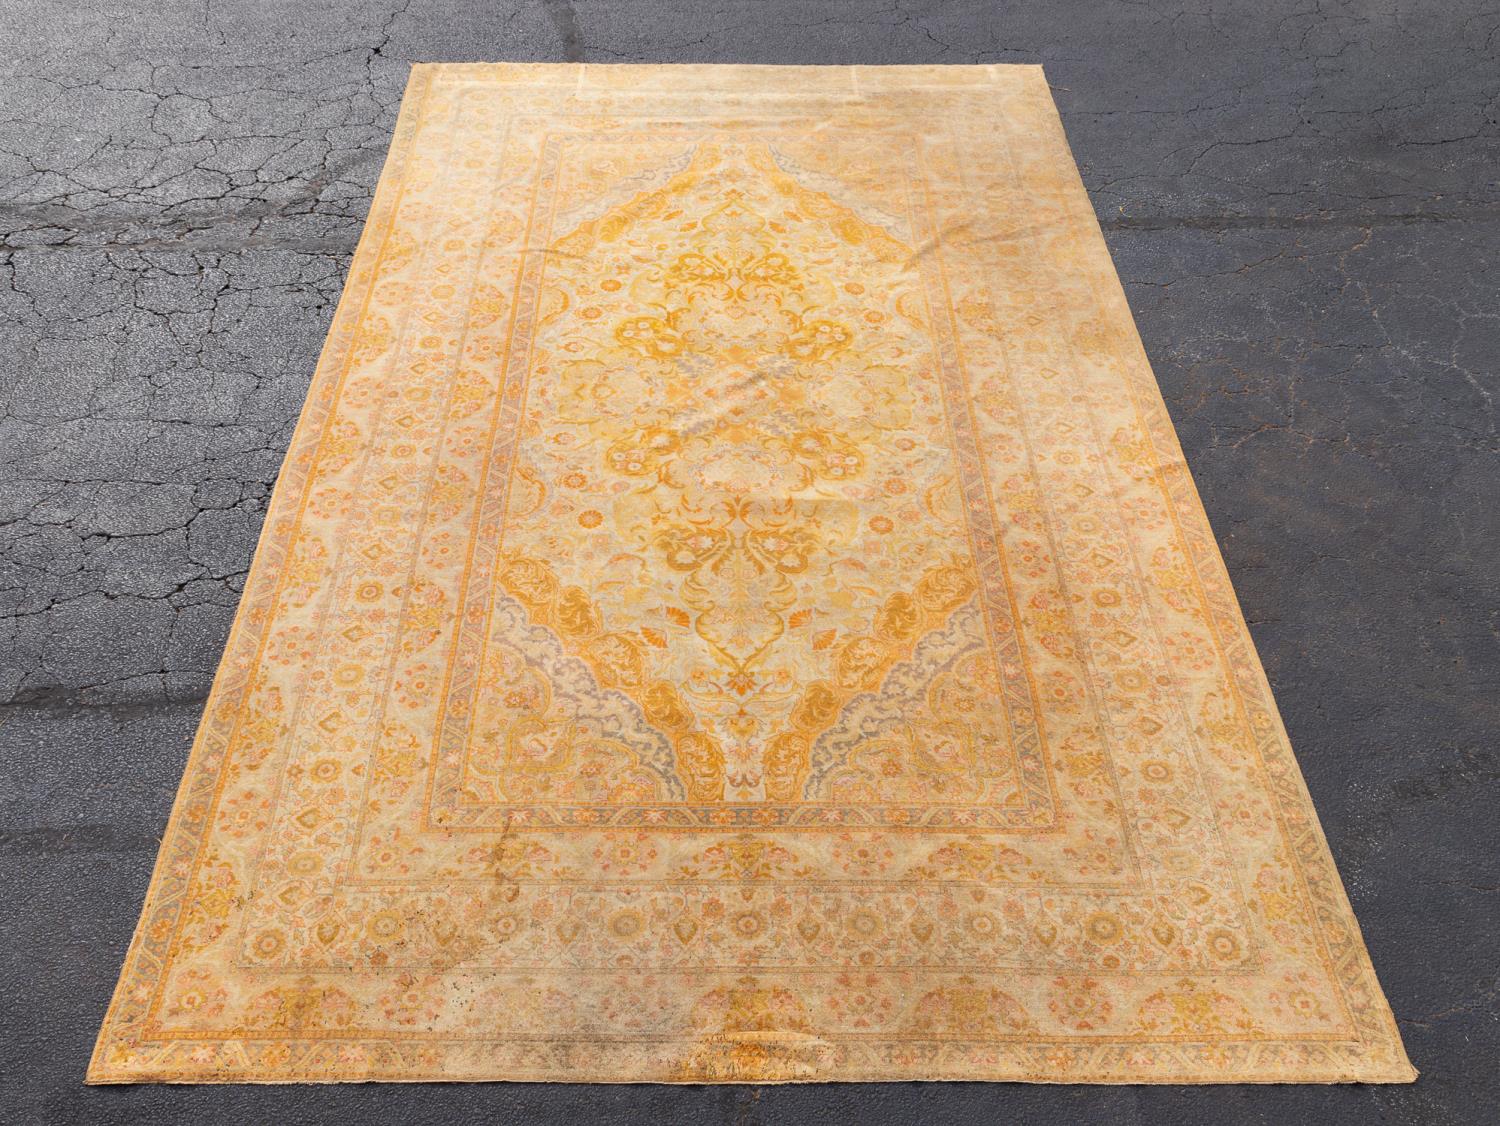 ANTIQUE HAND WOVEN AMRISTAR RUG,